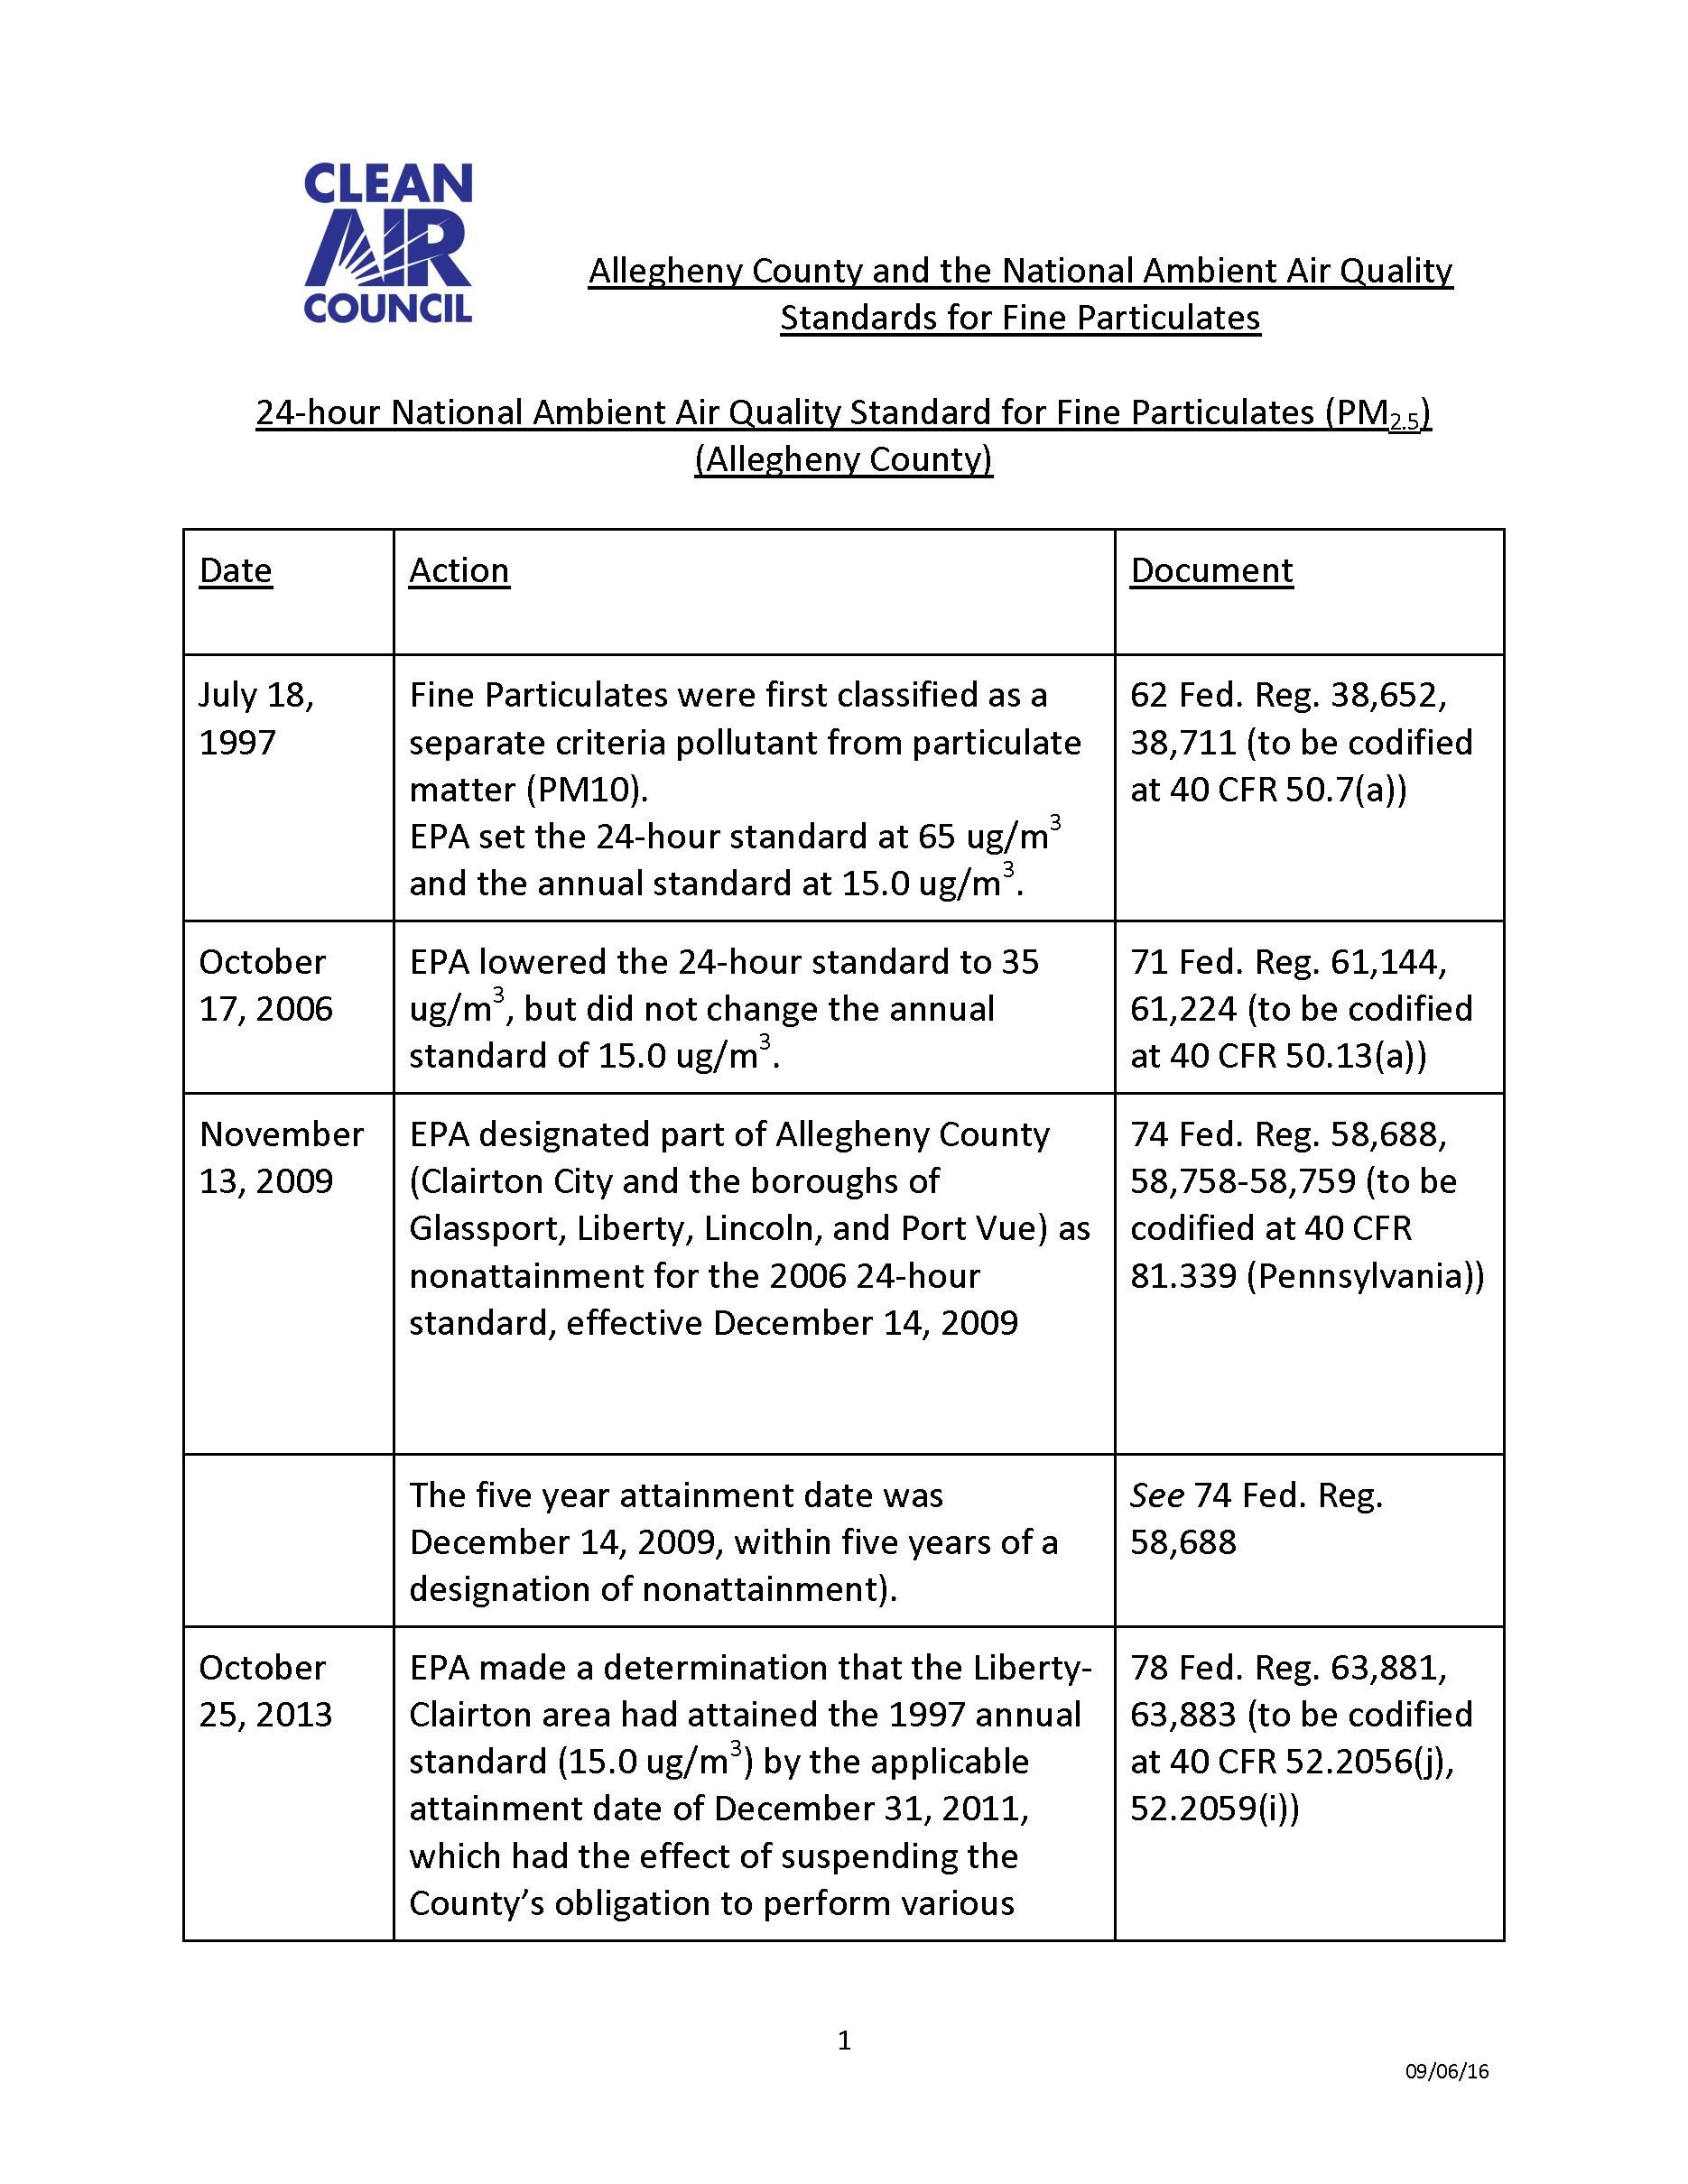 page 1 of Fact Sheet on Allegheny County and the National Ambient Air Quality Standards for Fine Particulates